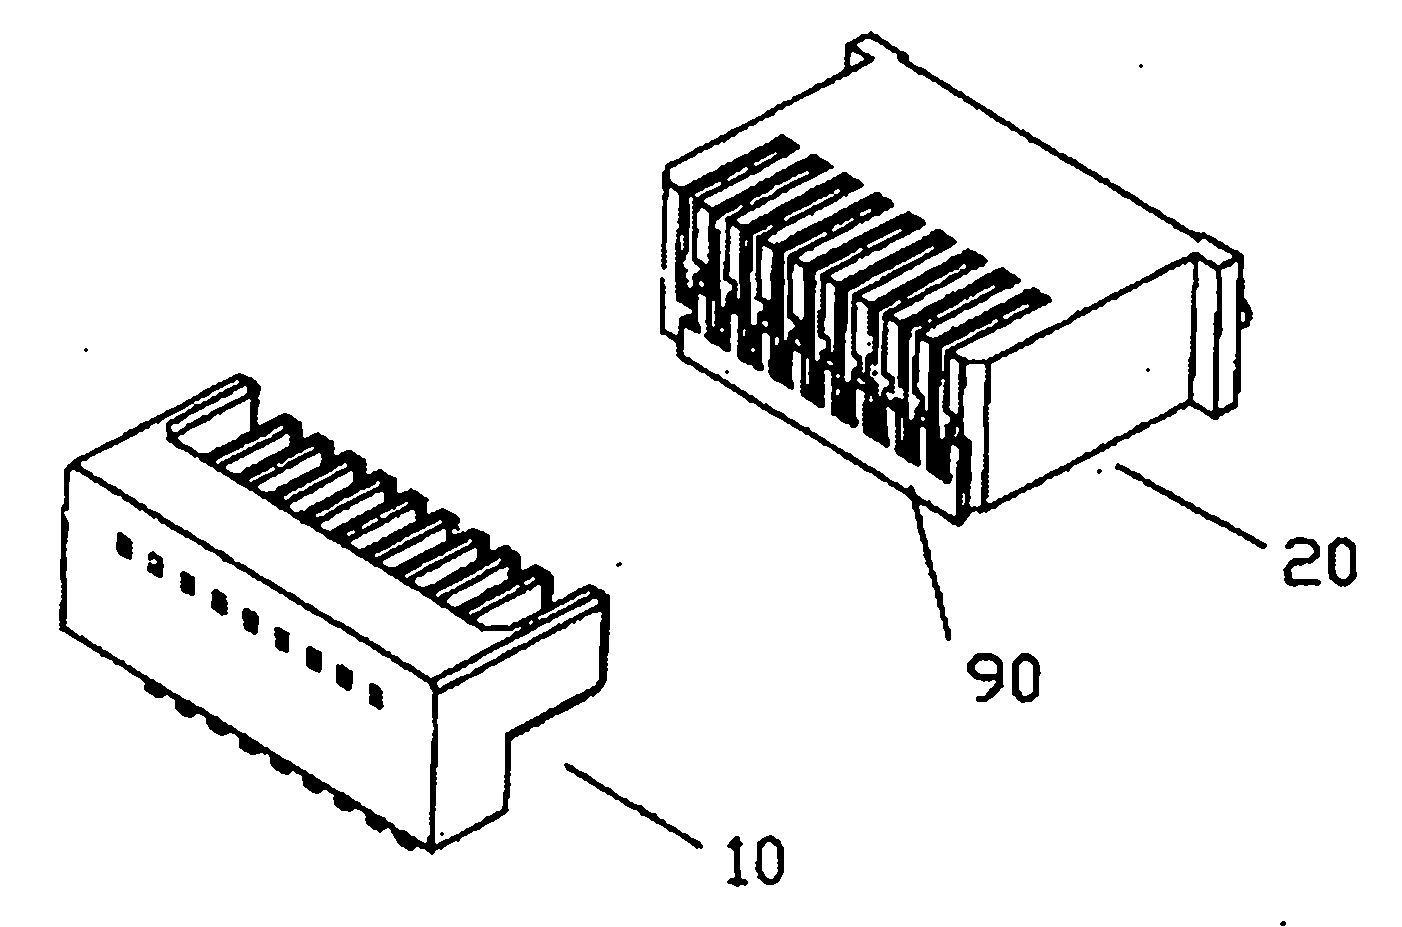 Battery connector structure